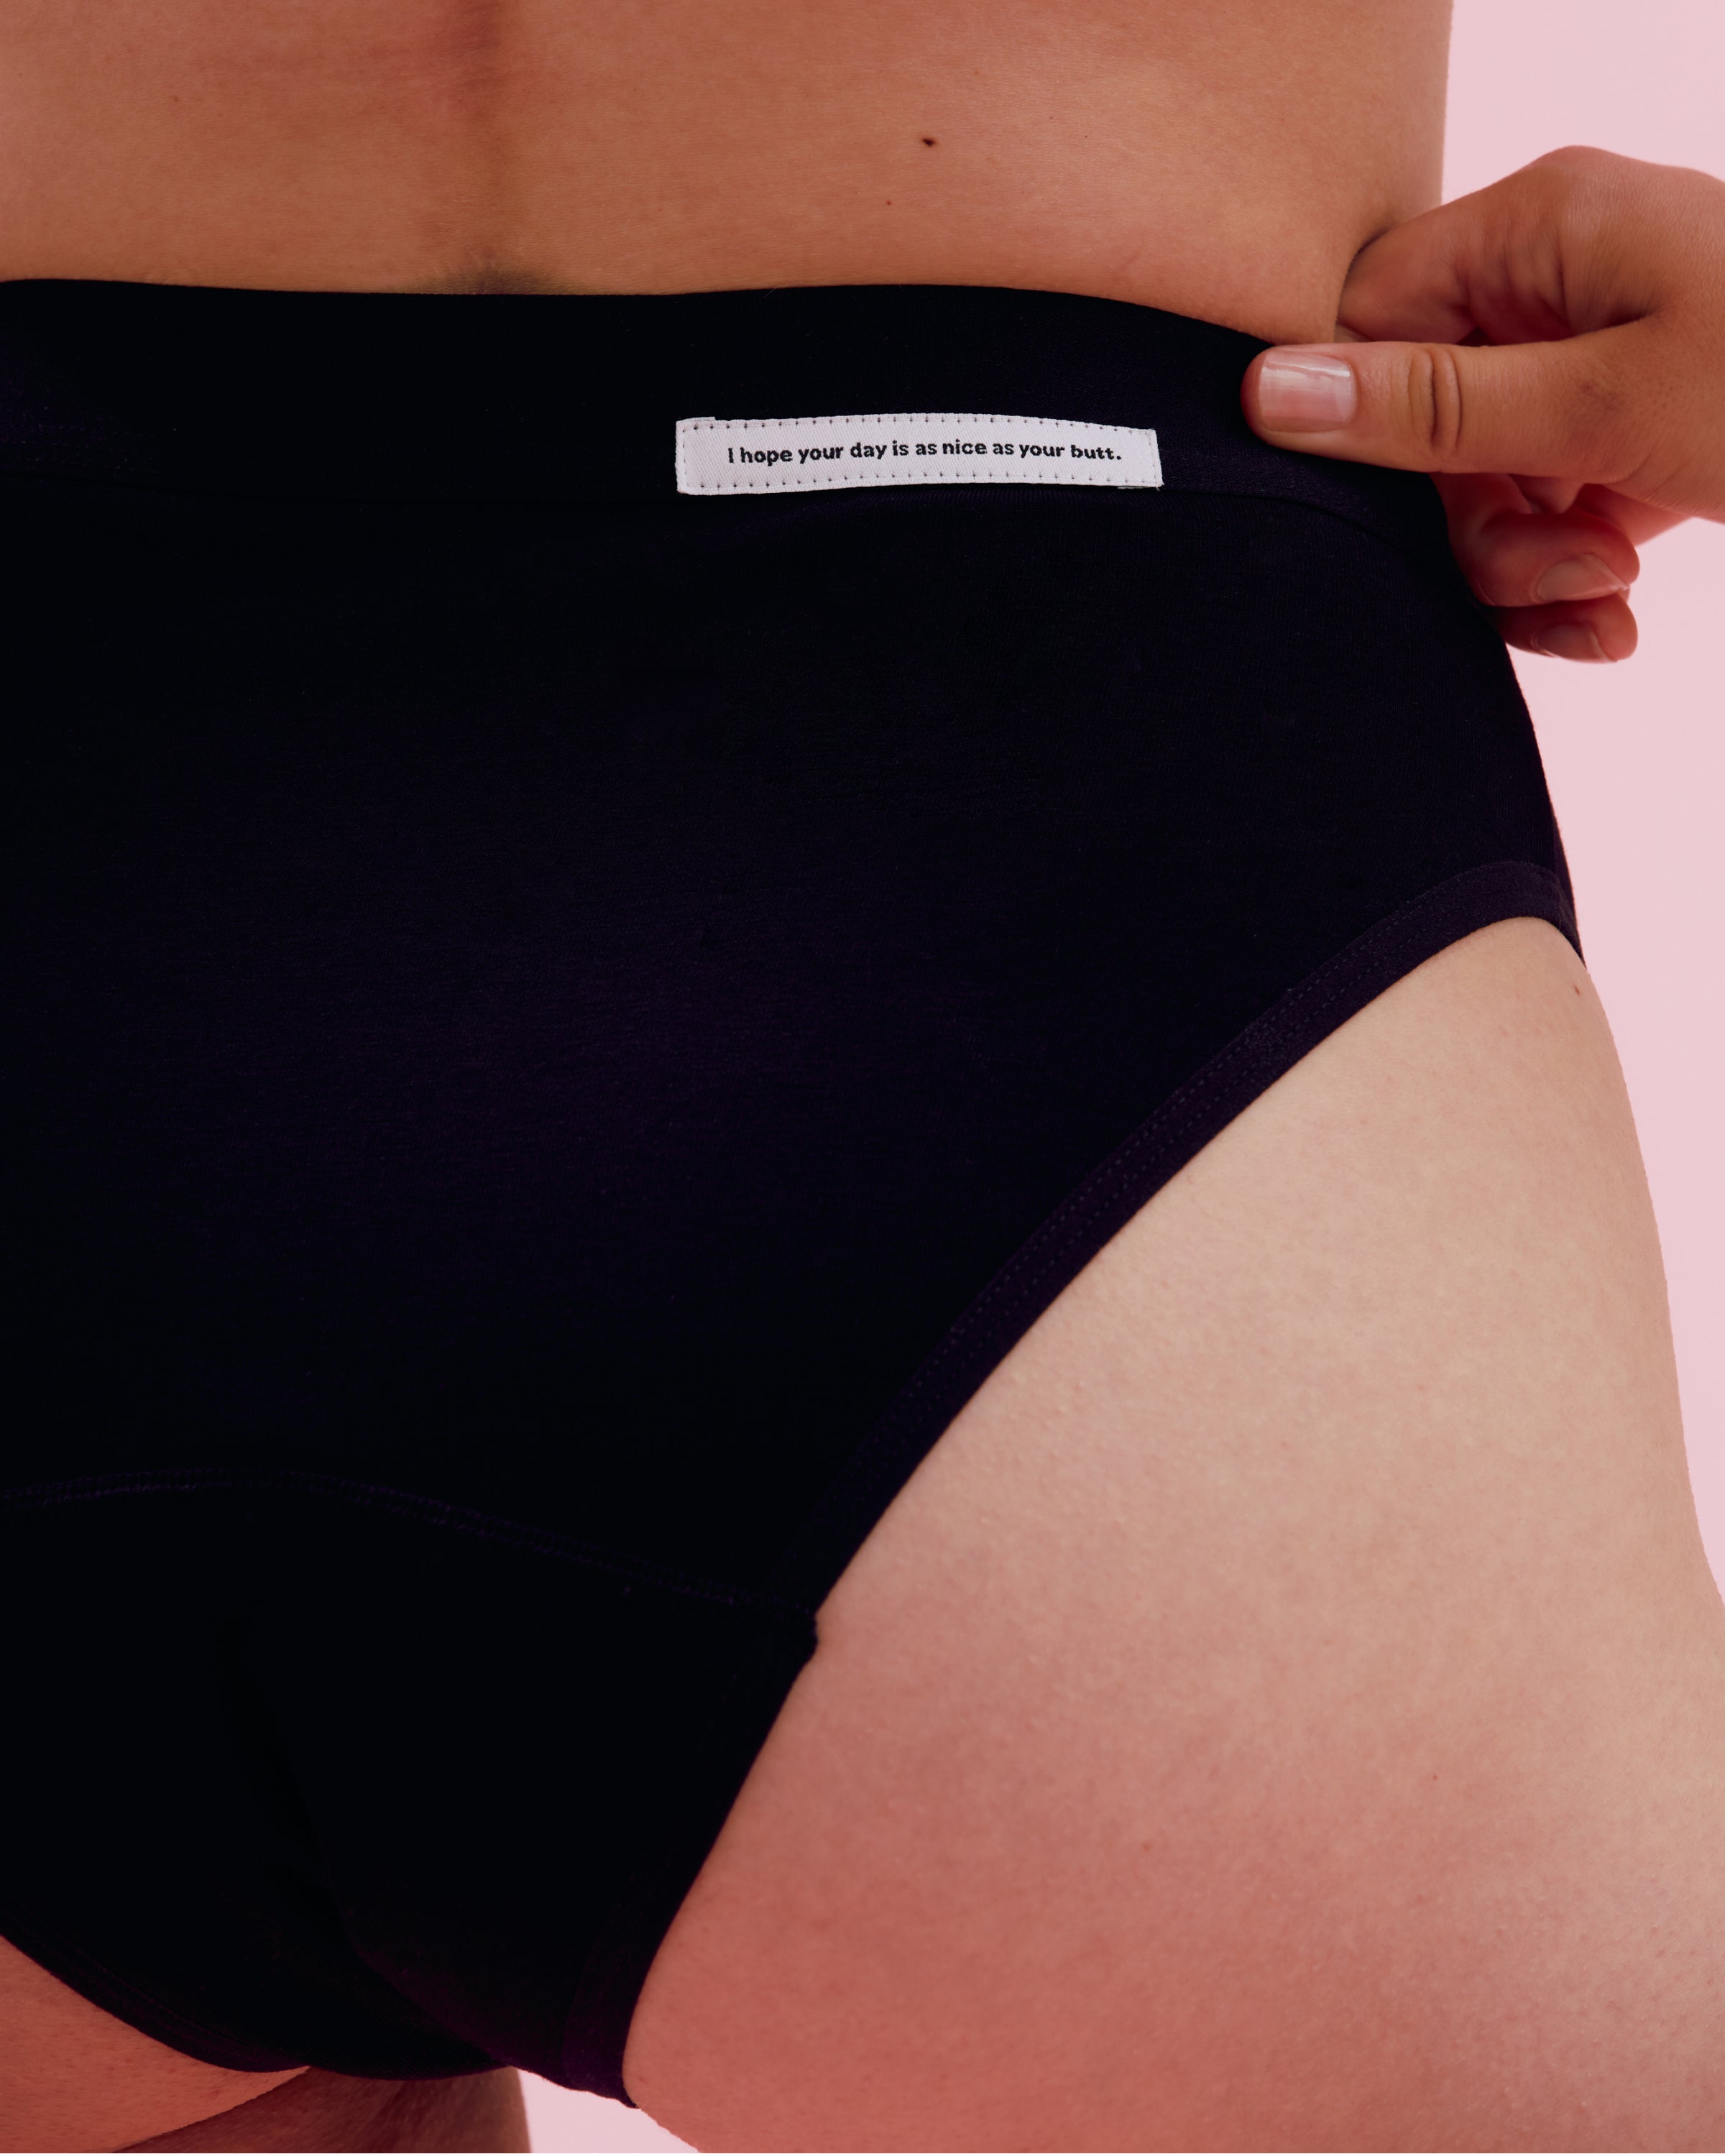 Period Panty – Strong – High Waist 1.0